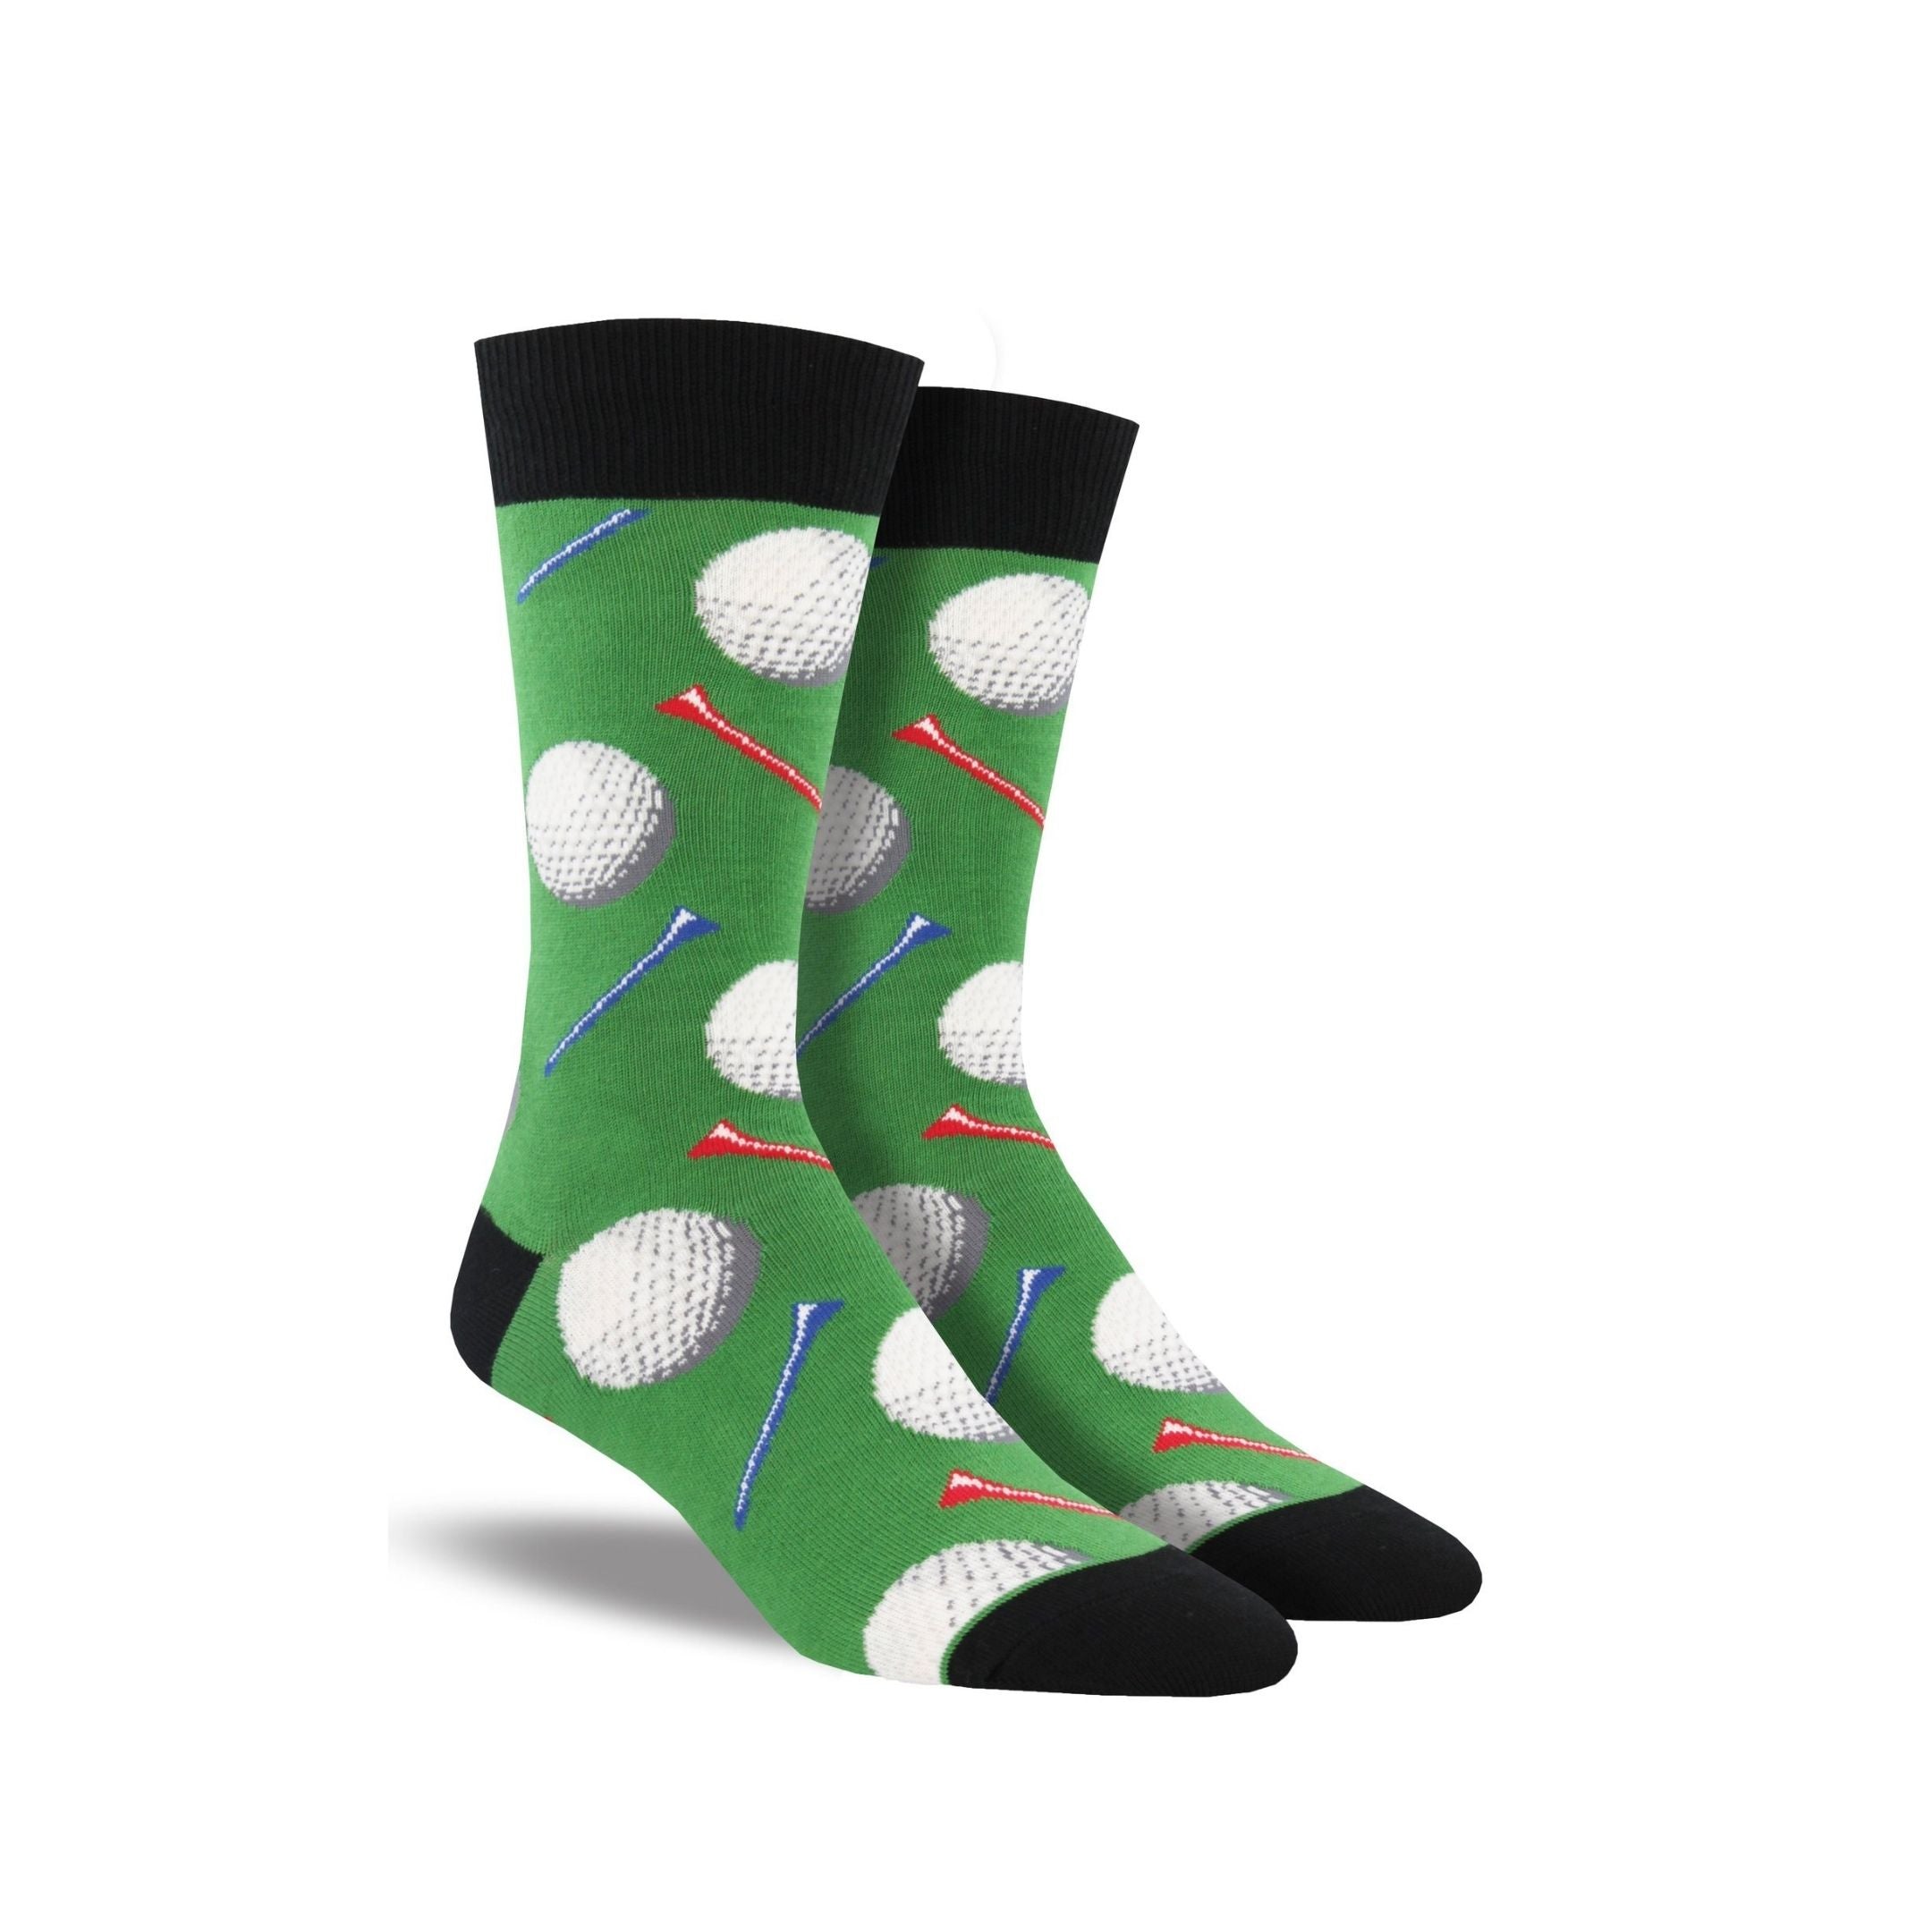 Green socks with black accents with golf balls and tees on them